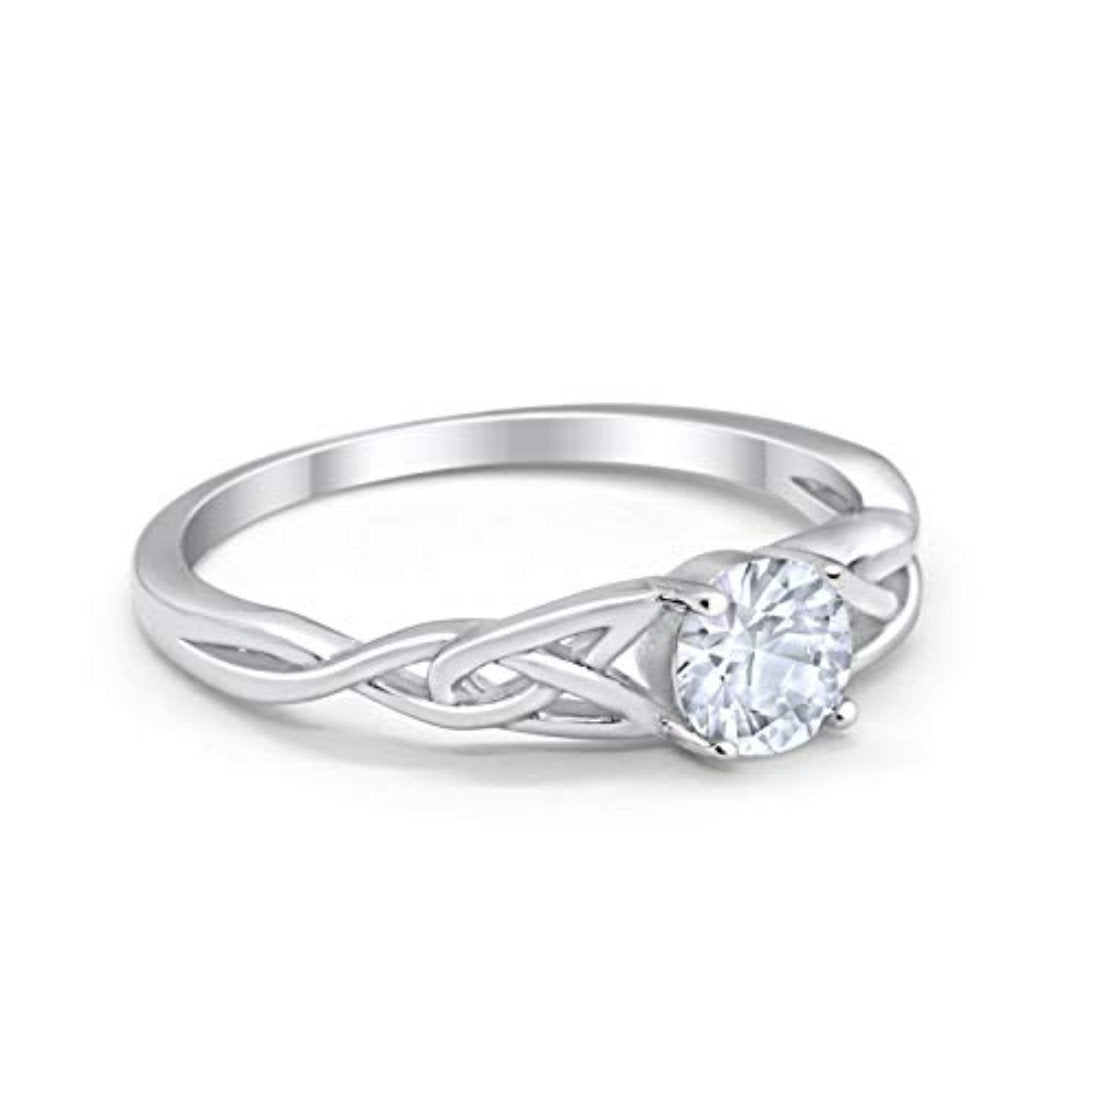 Solitaire Trinity Engagement Ring Simulated Cubic Zirconia 925 Sterling Silver